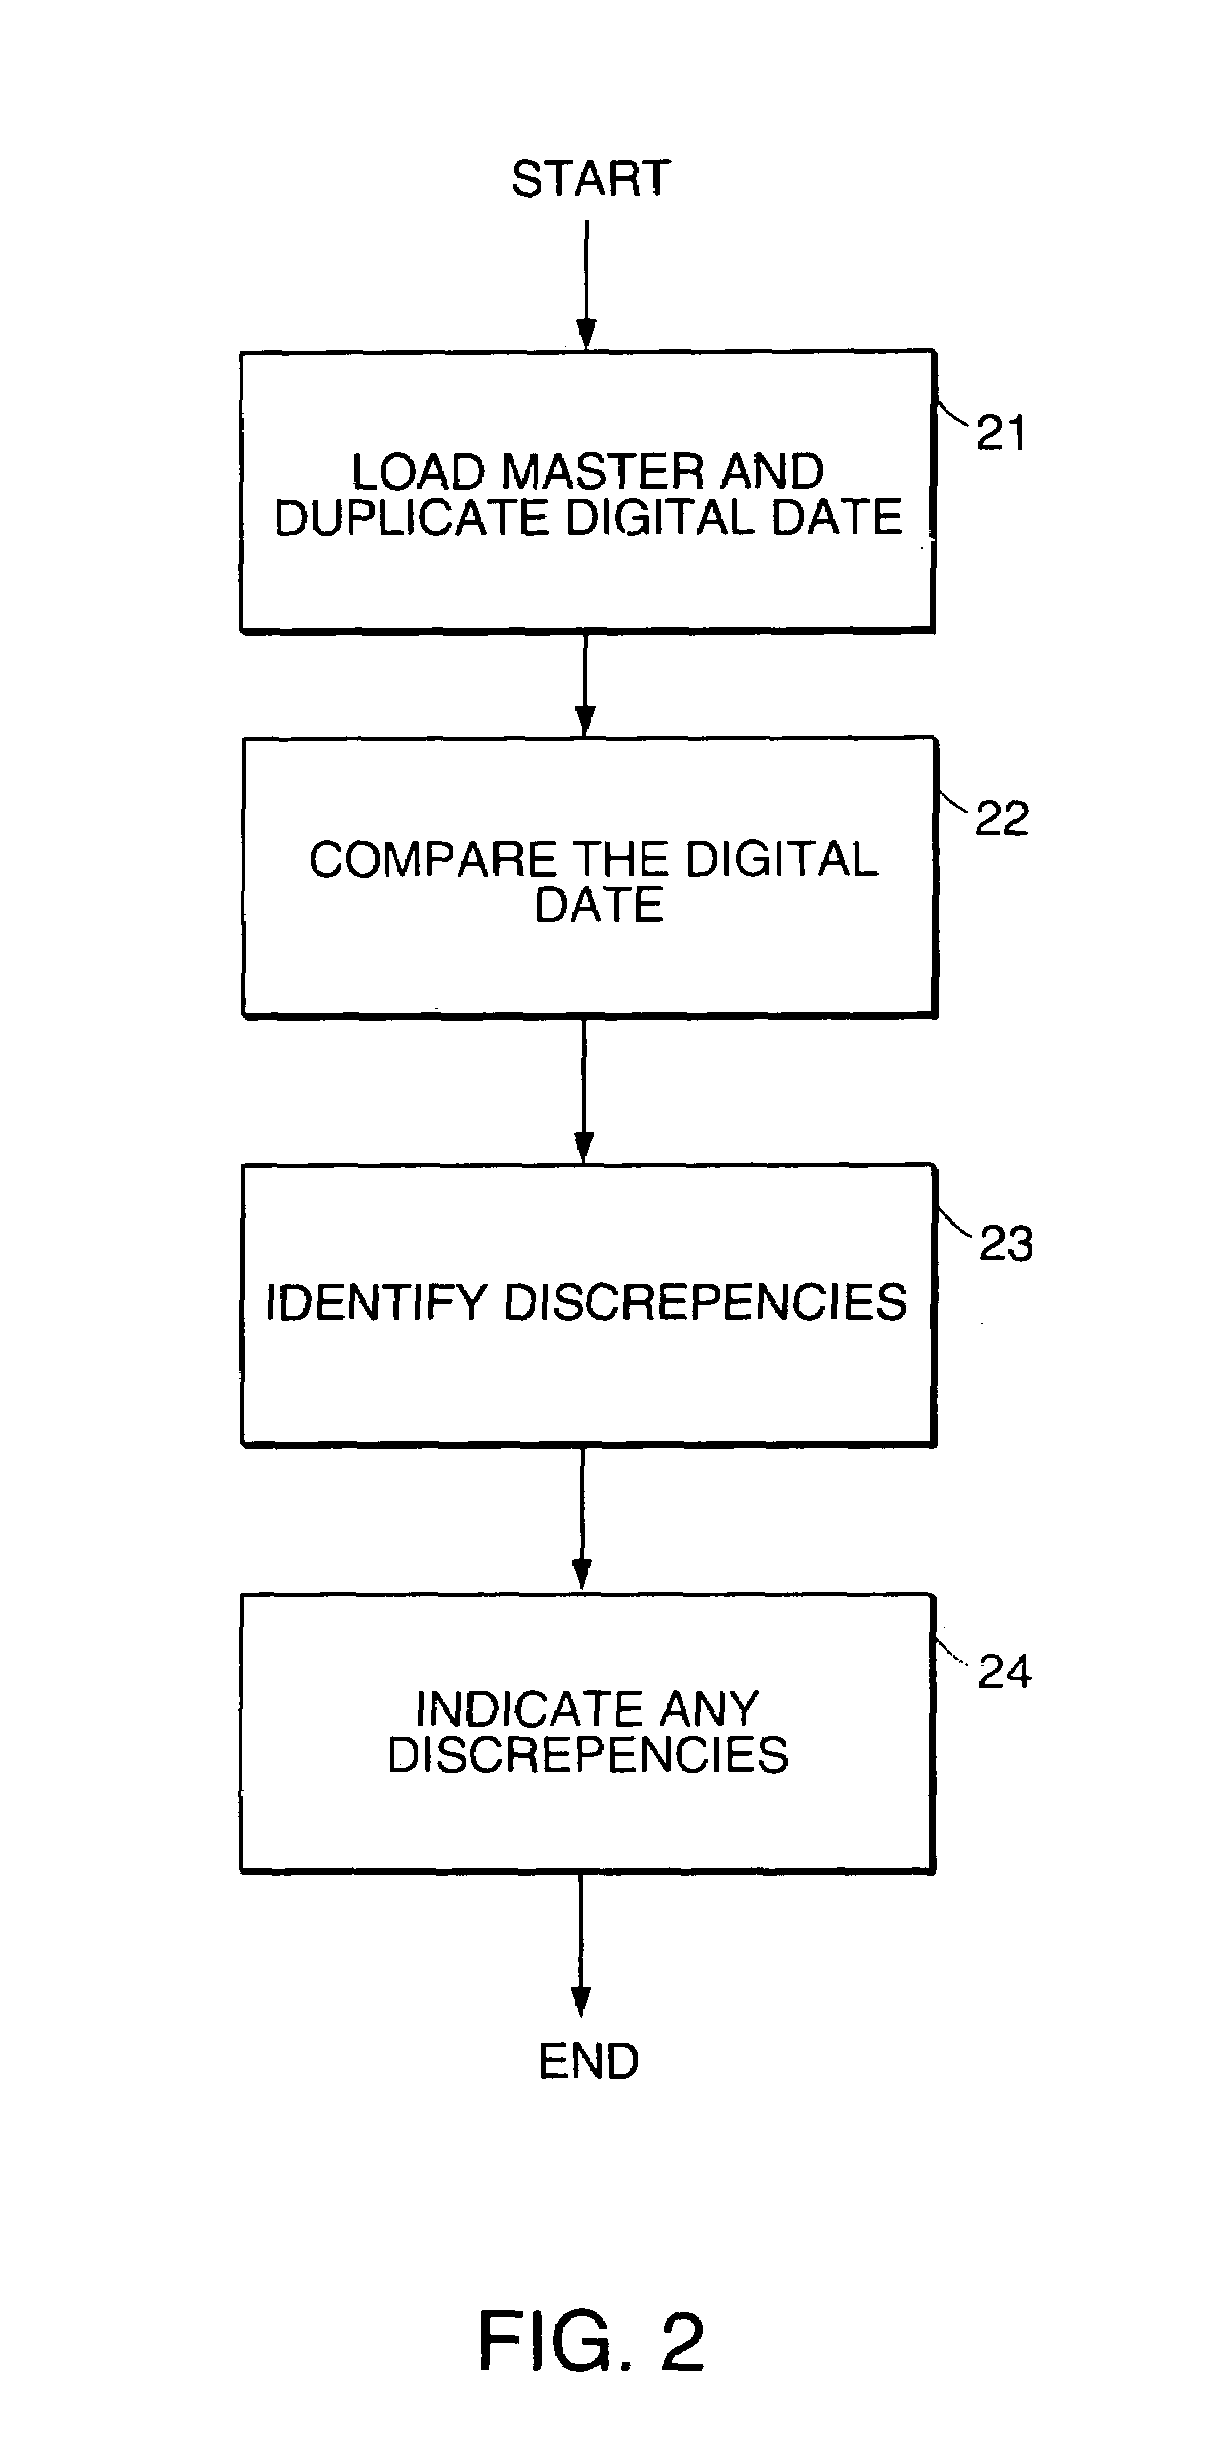 System and method for identifying inconsistencies in duplicate digital videos